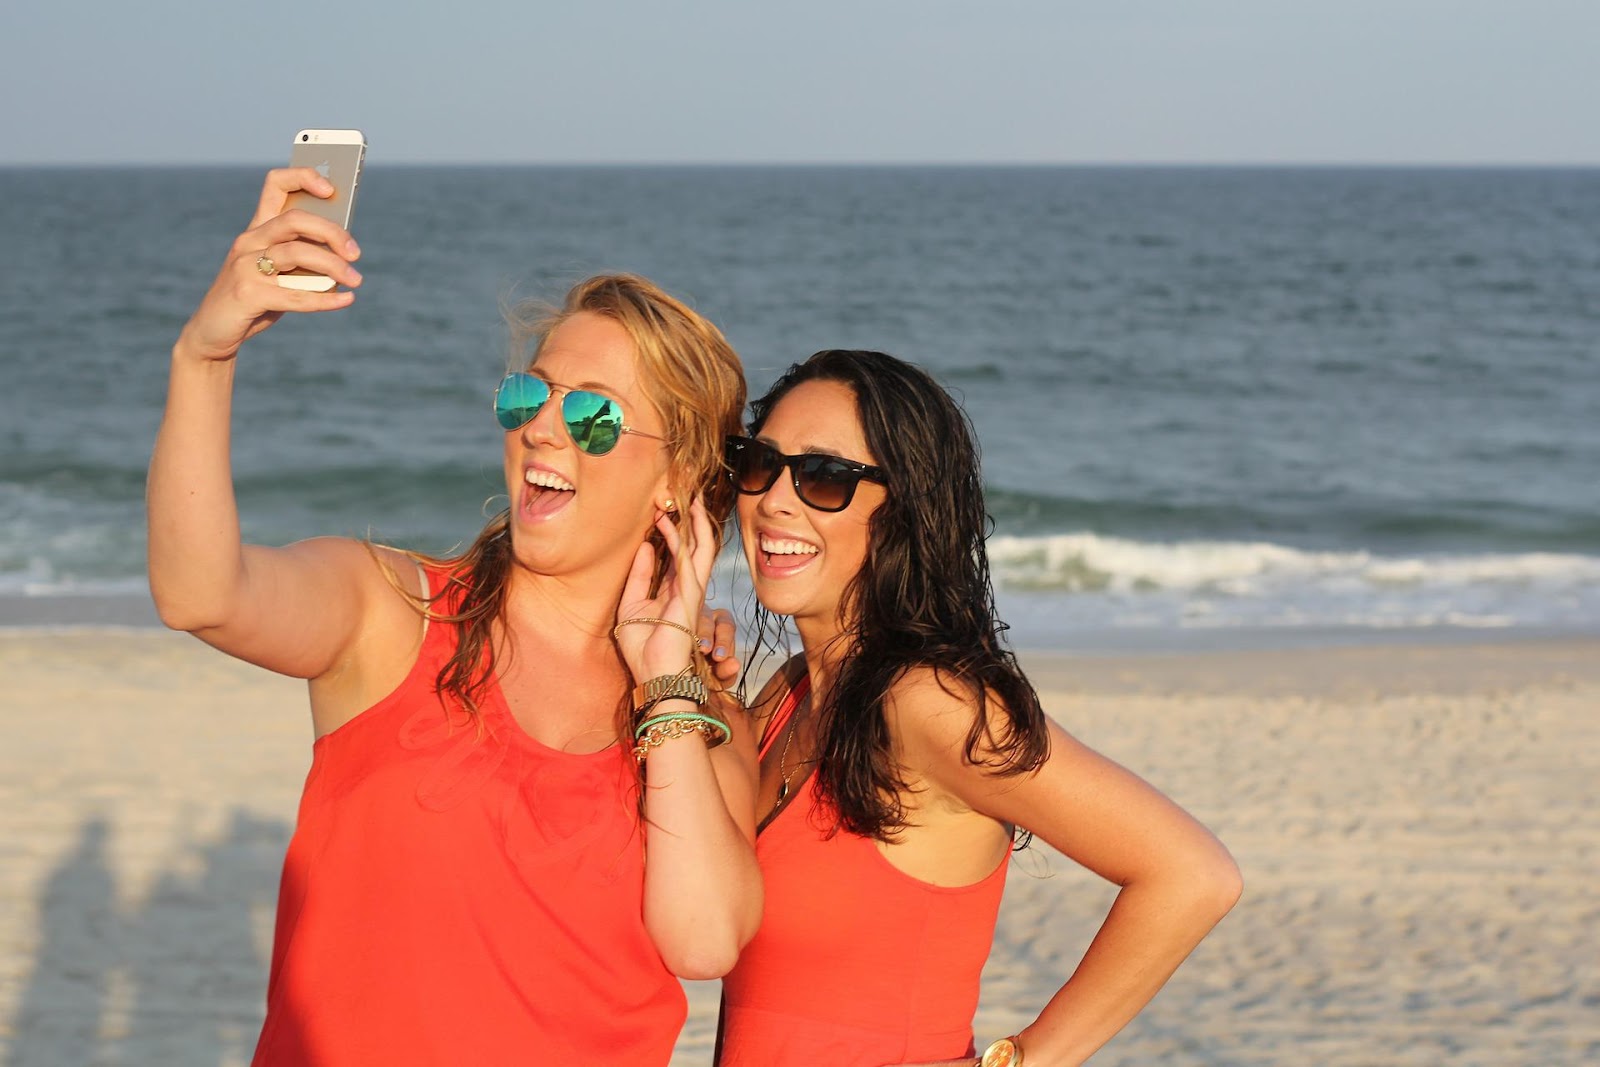 Two girls take a selfie on the beach